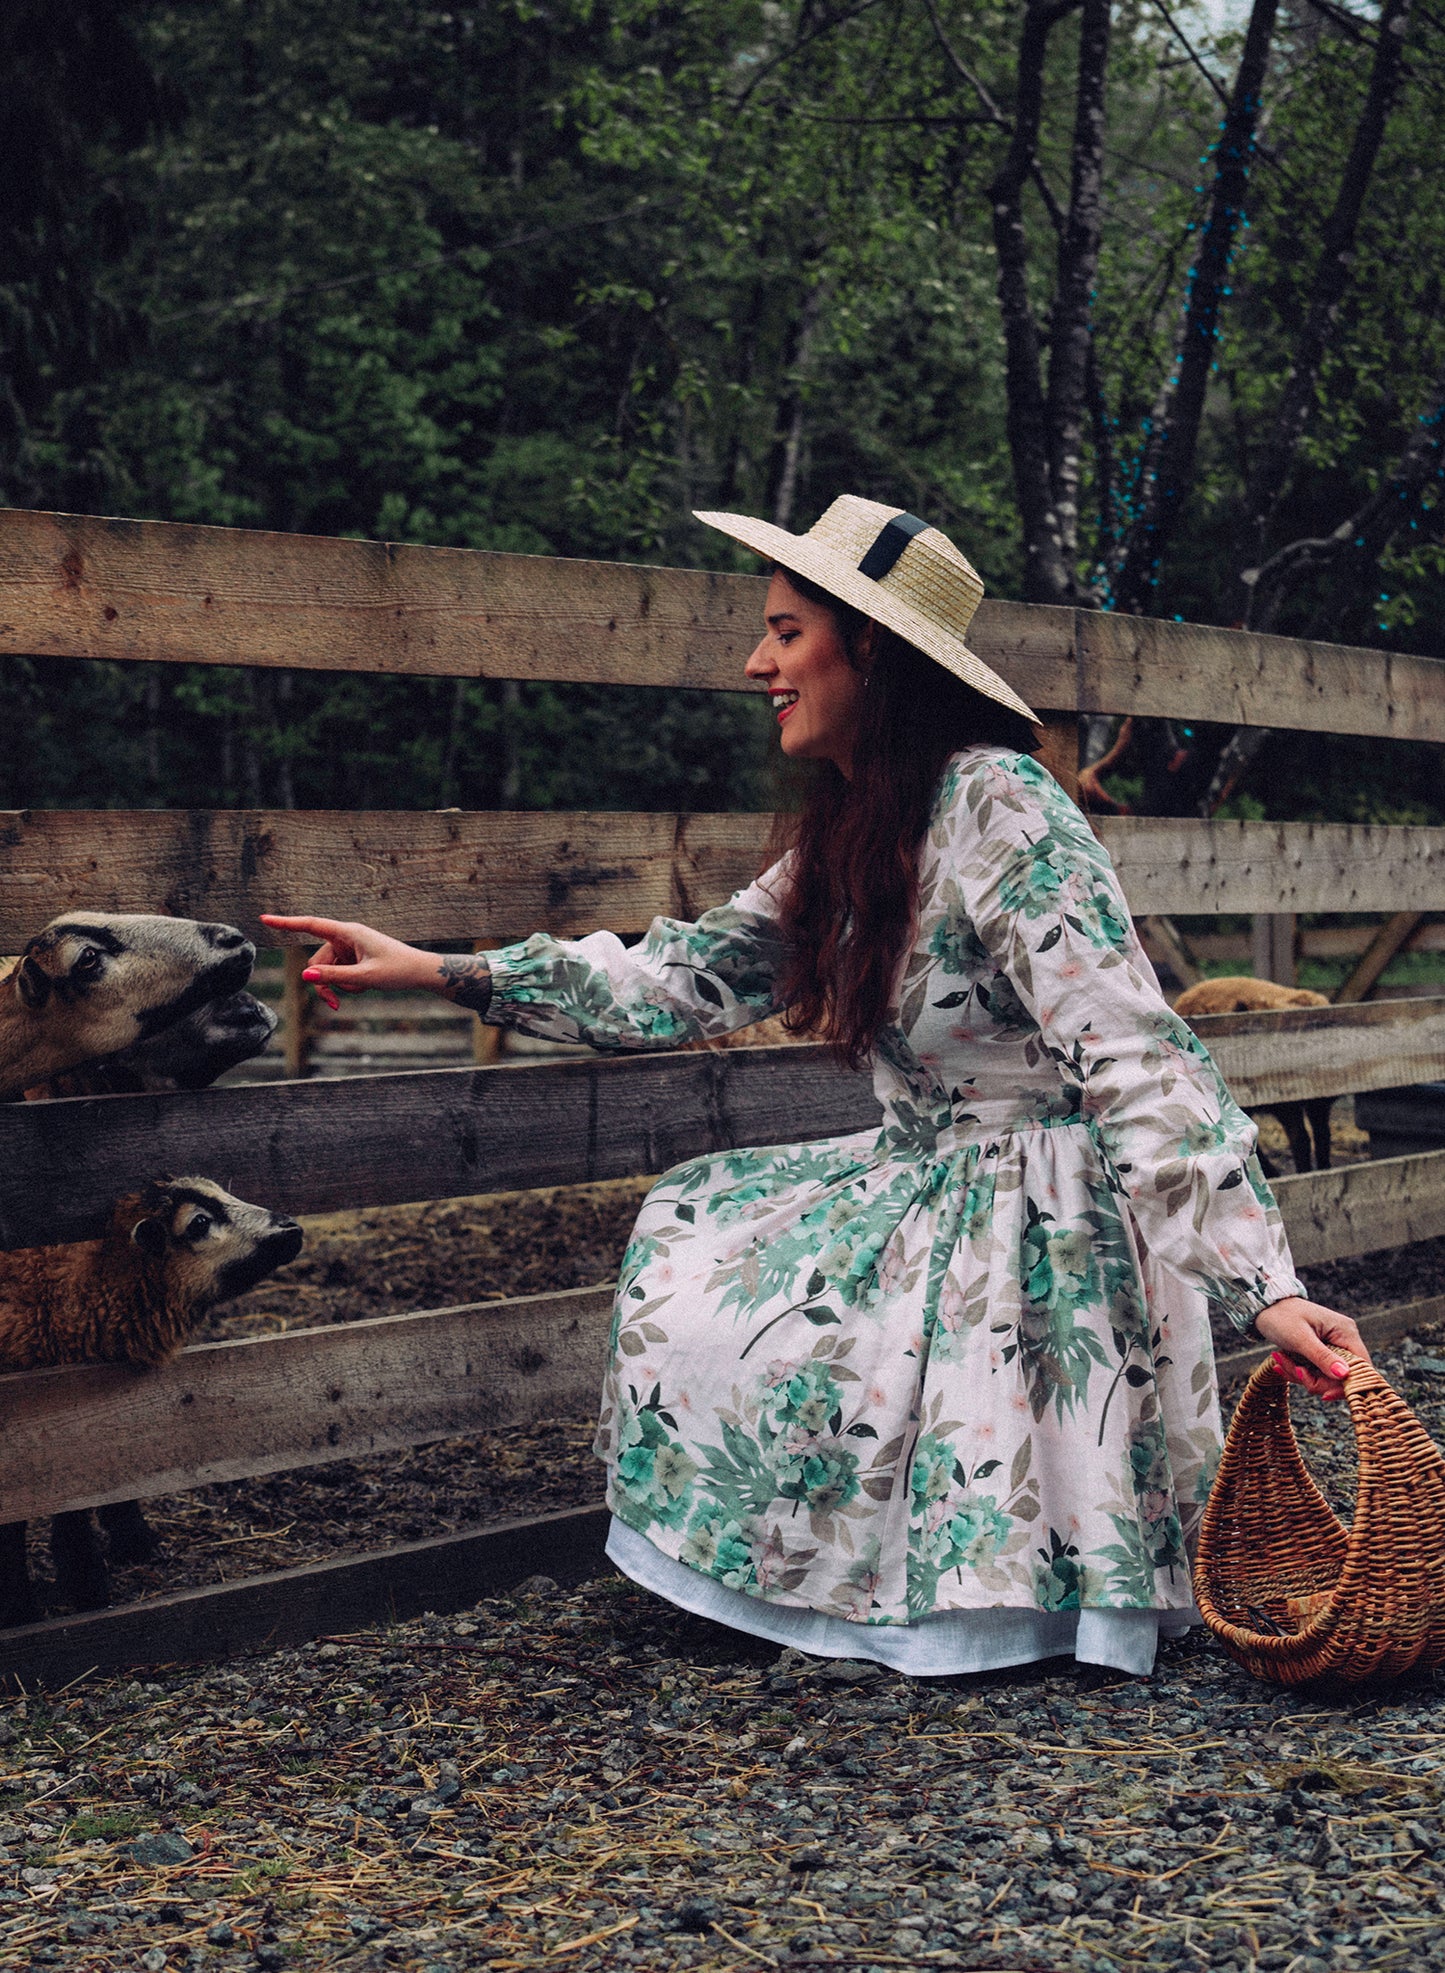 Girl on a farm petting goats. She is wearing a straw hat, holding a basket and wearing a floral ivory linen dress with soft green and pink hydrangea flowers print